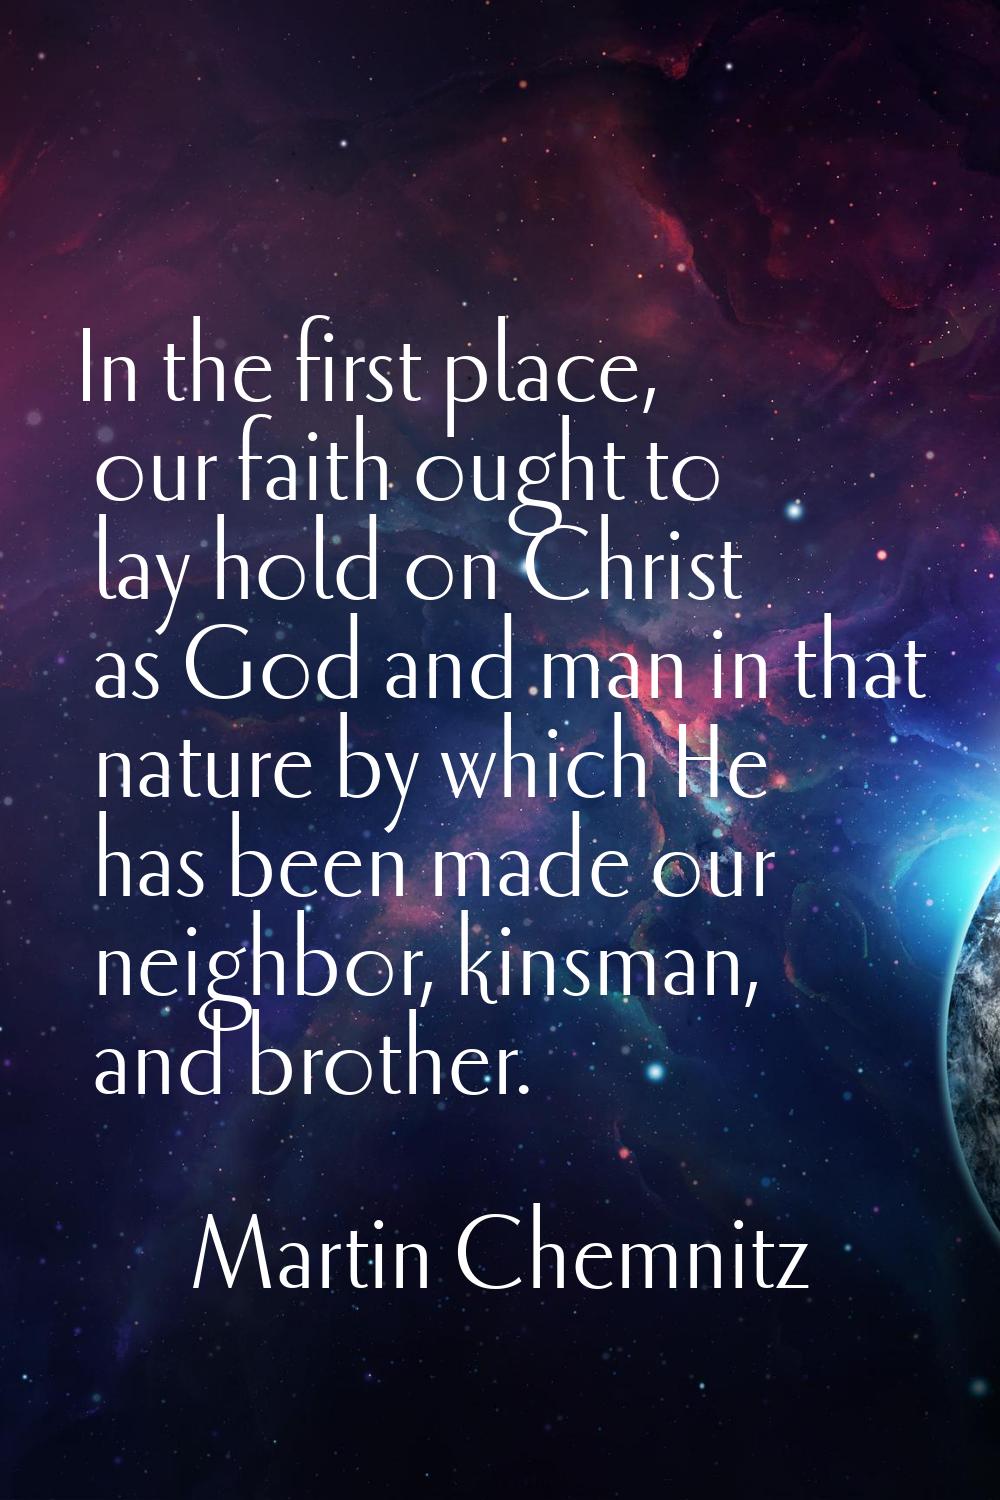 In the first place, our faith ought to lay hold on Christ as God and man in that nature by which He